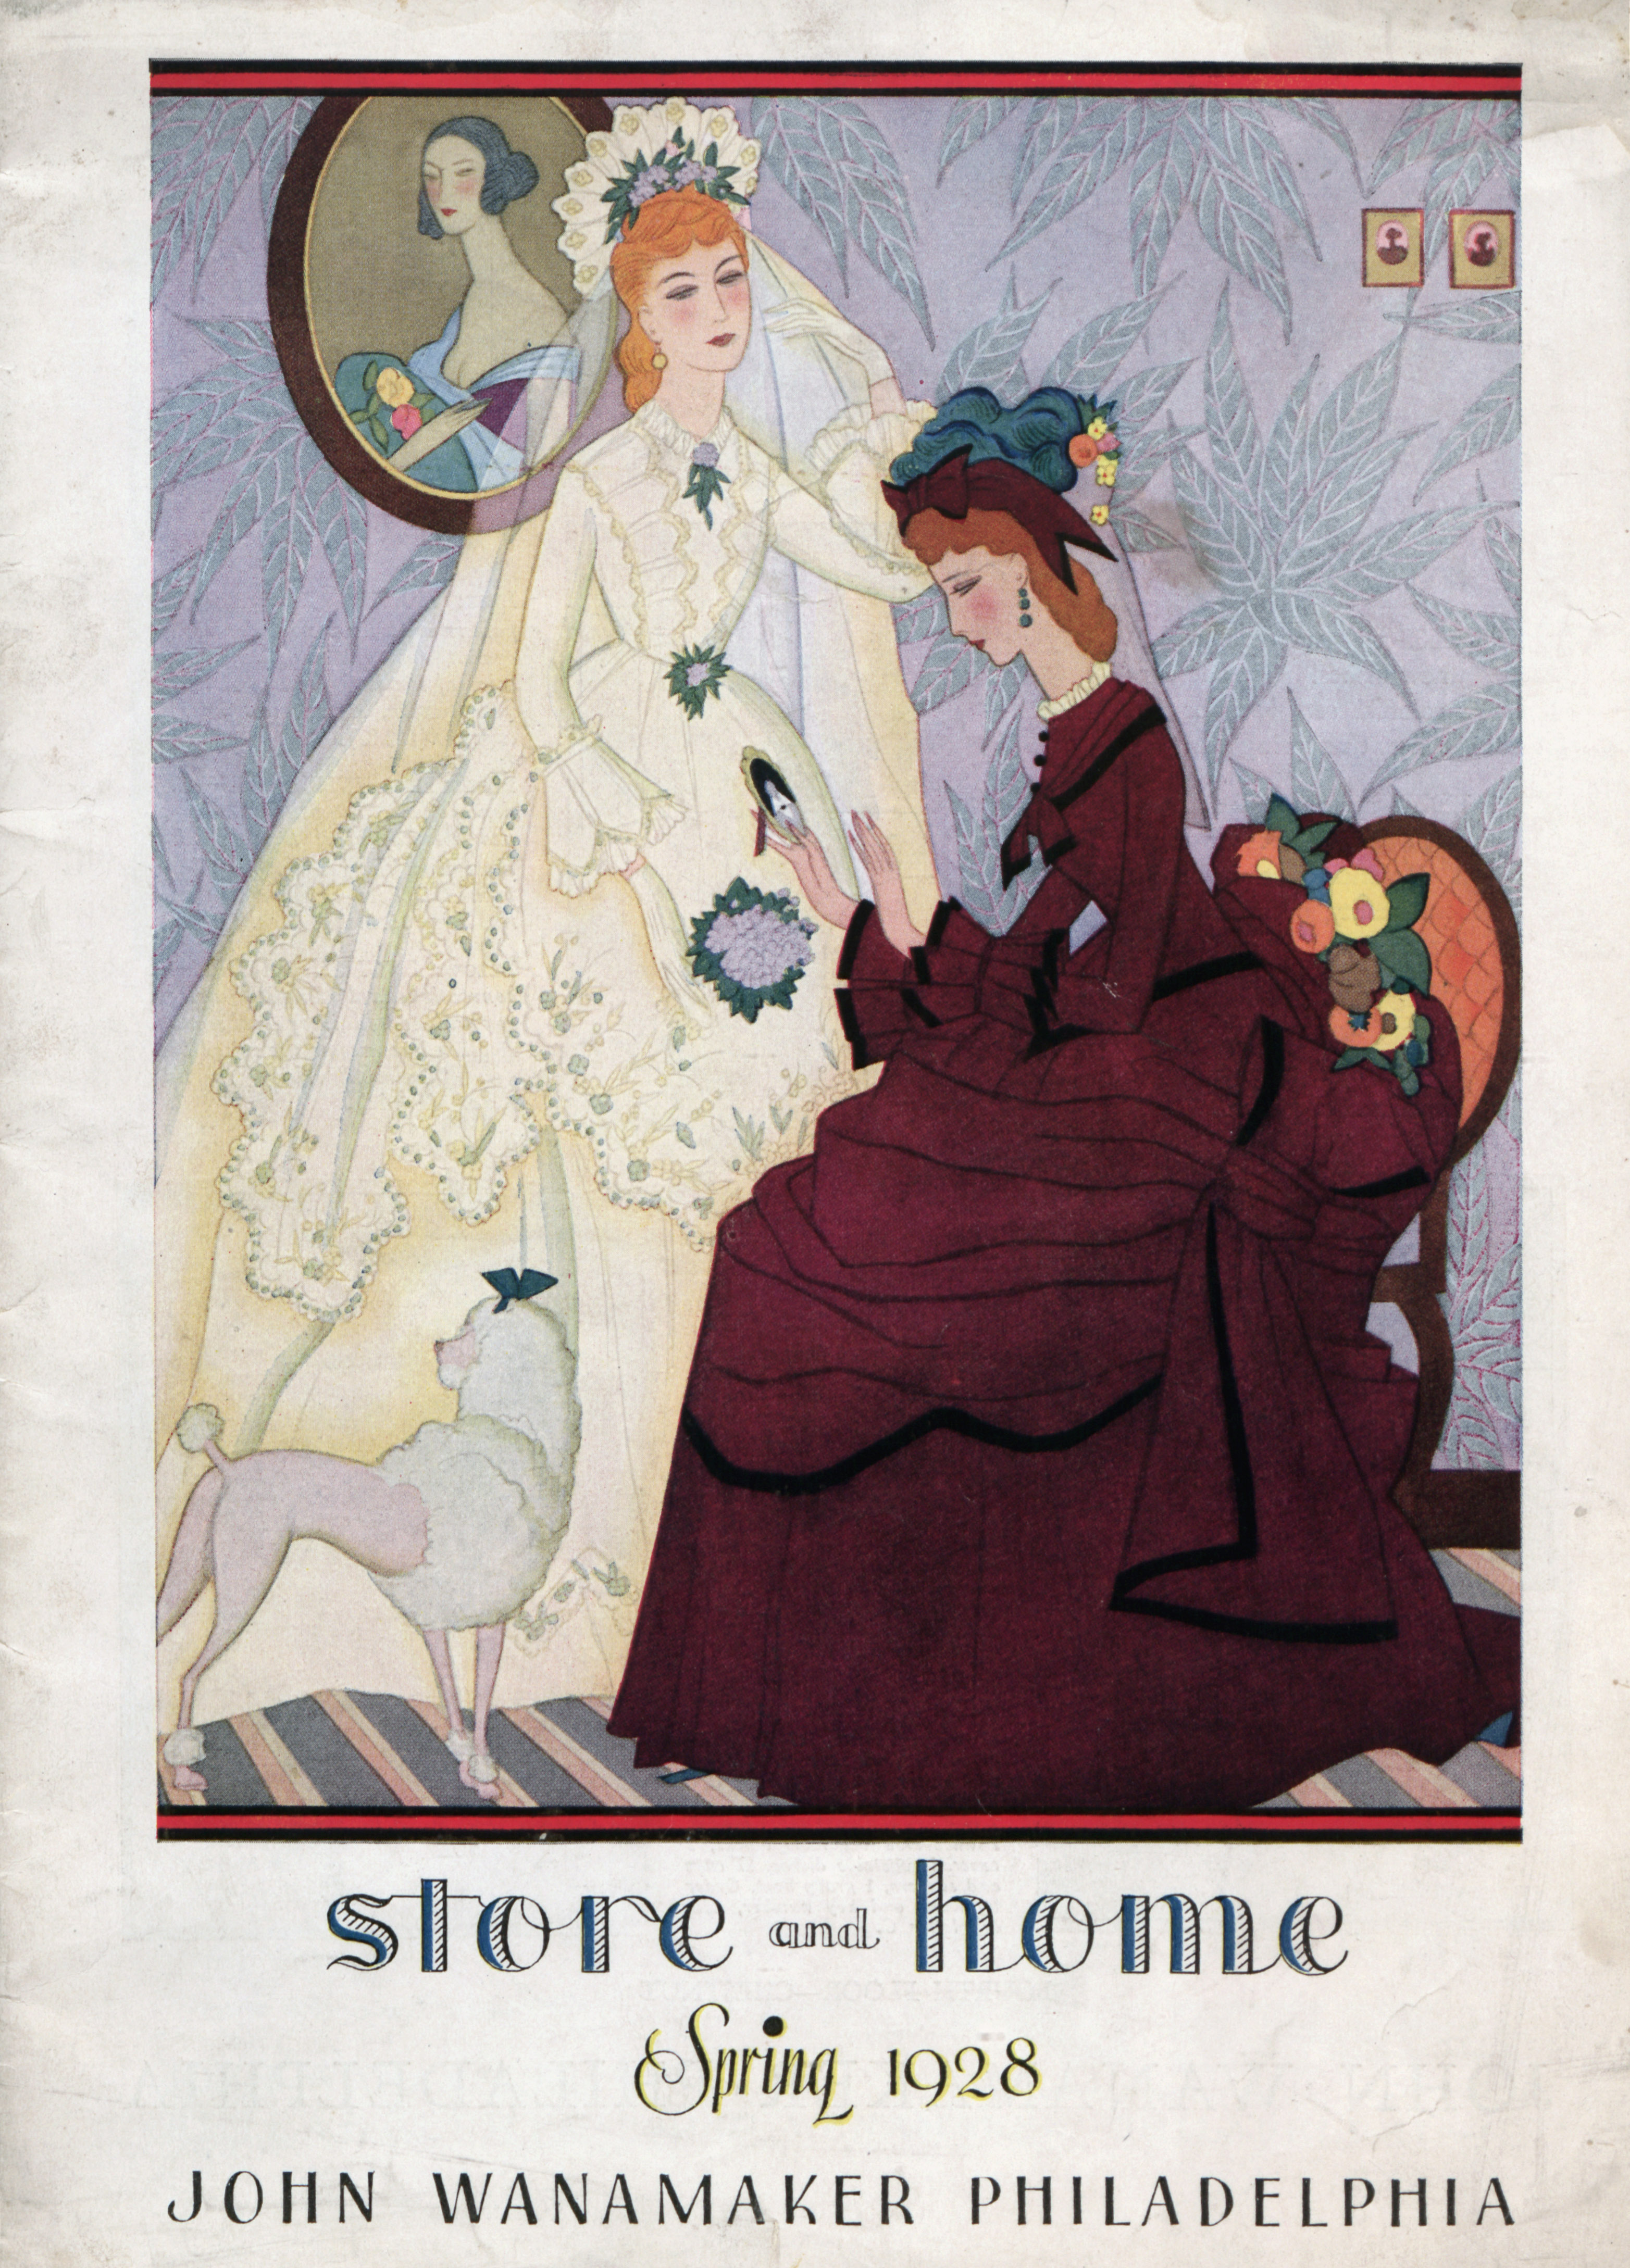 Catalog cover featuring a color illustration of two women in dresses